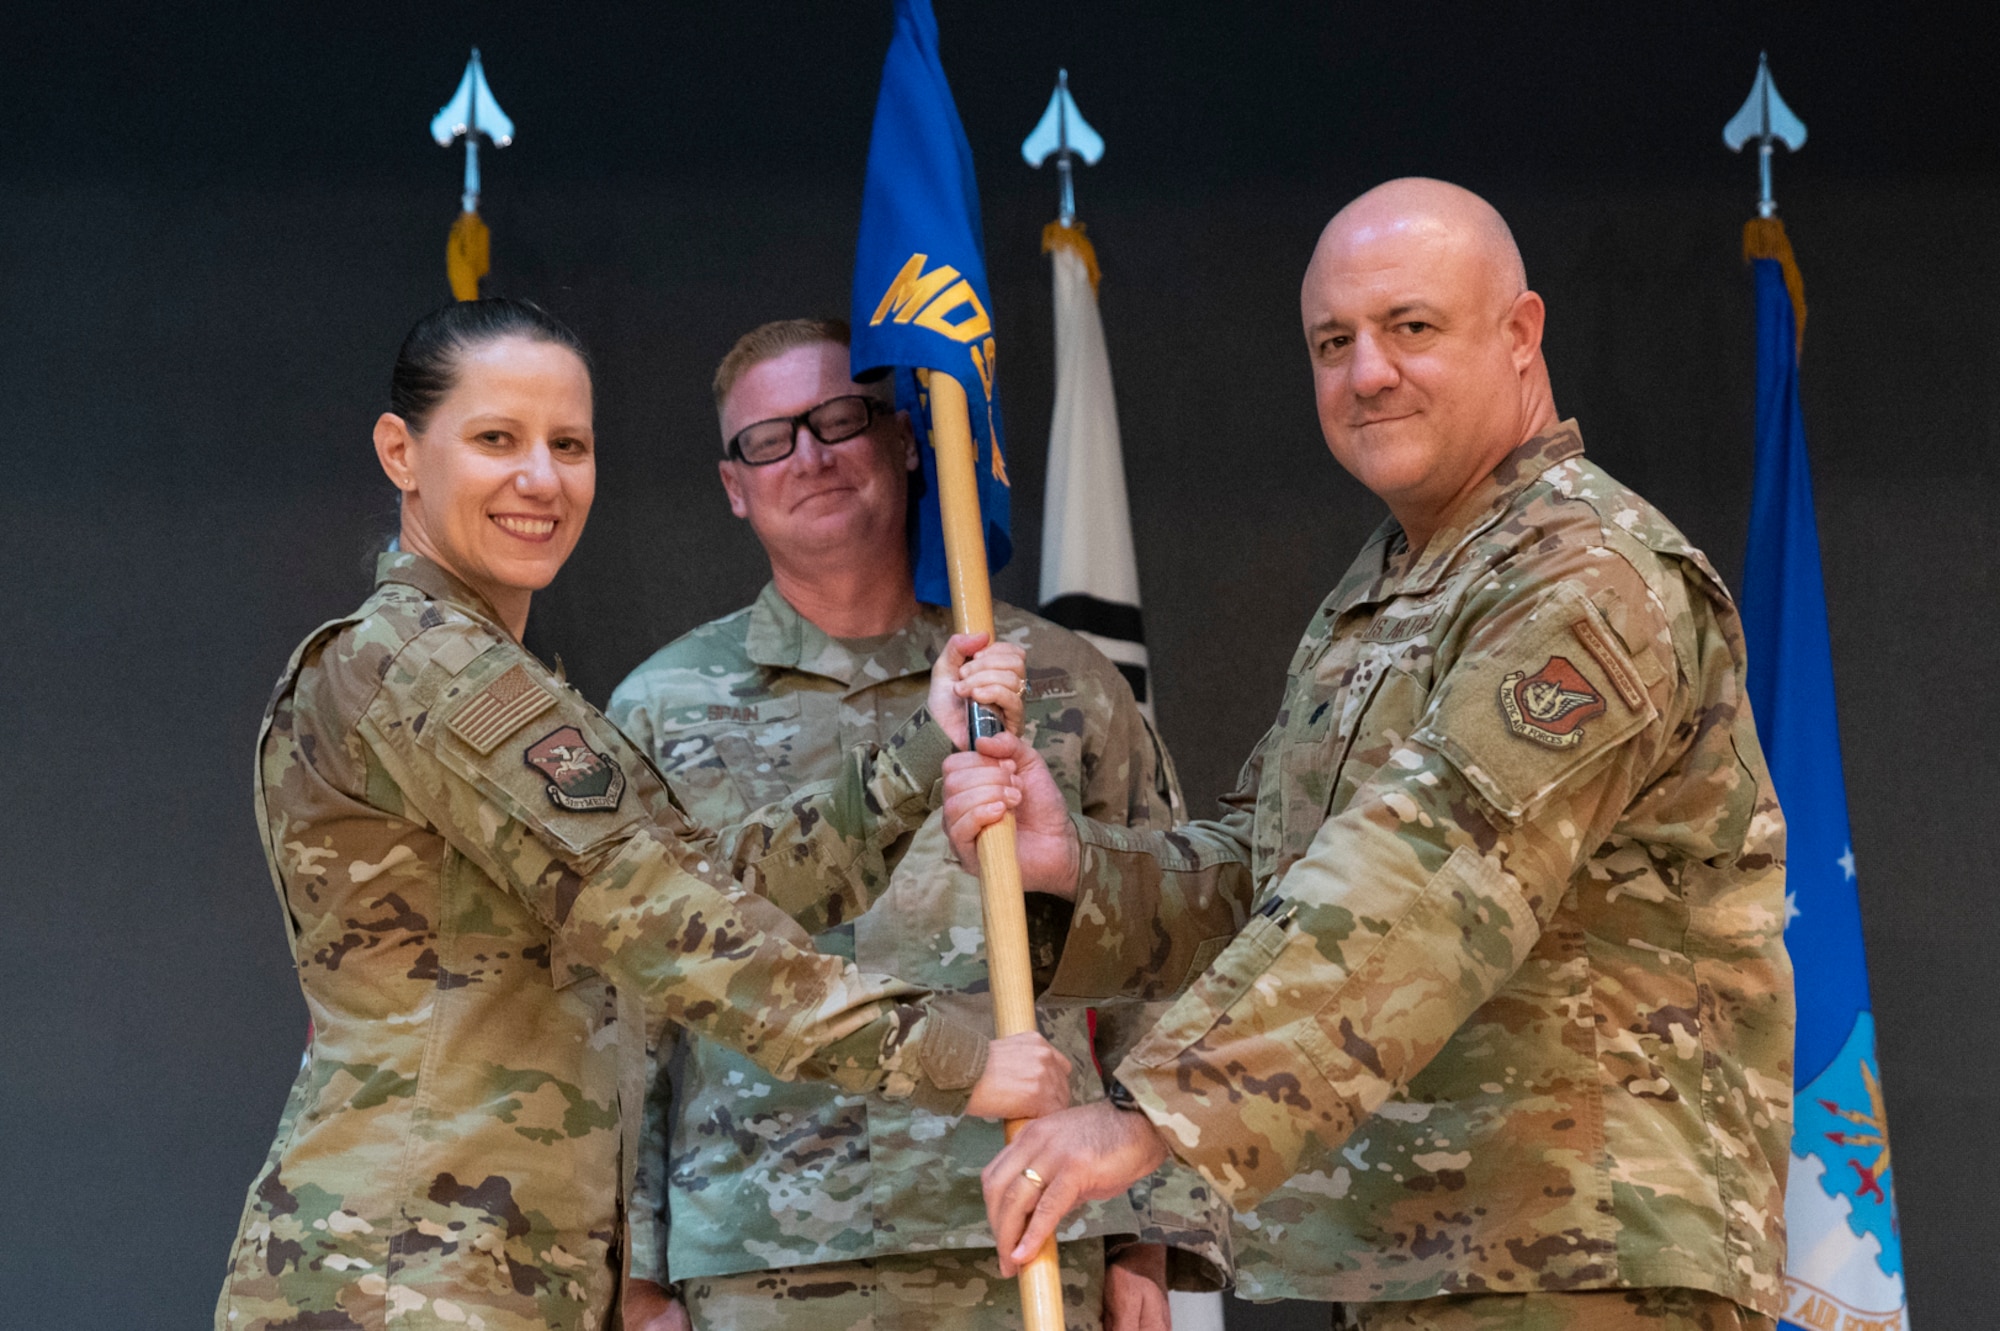 Col. Jennifer Vecchione, left, 51st Medical Group commander, presents the guidon to Lt. Col. Marc Rittberg, 51st Medical Support Squadron (MDSS) incoming commander